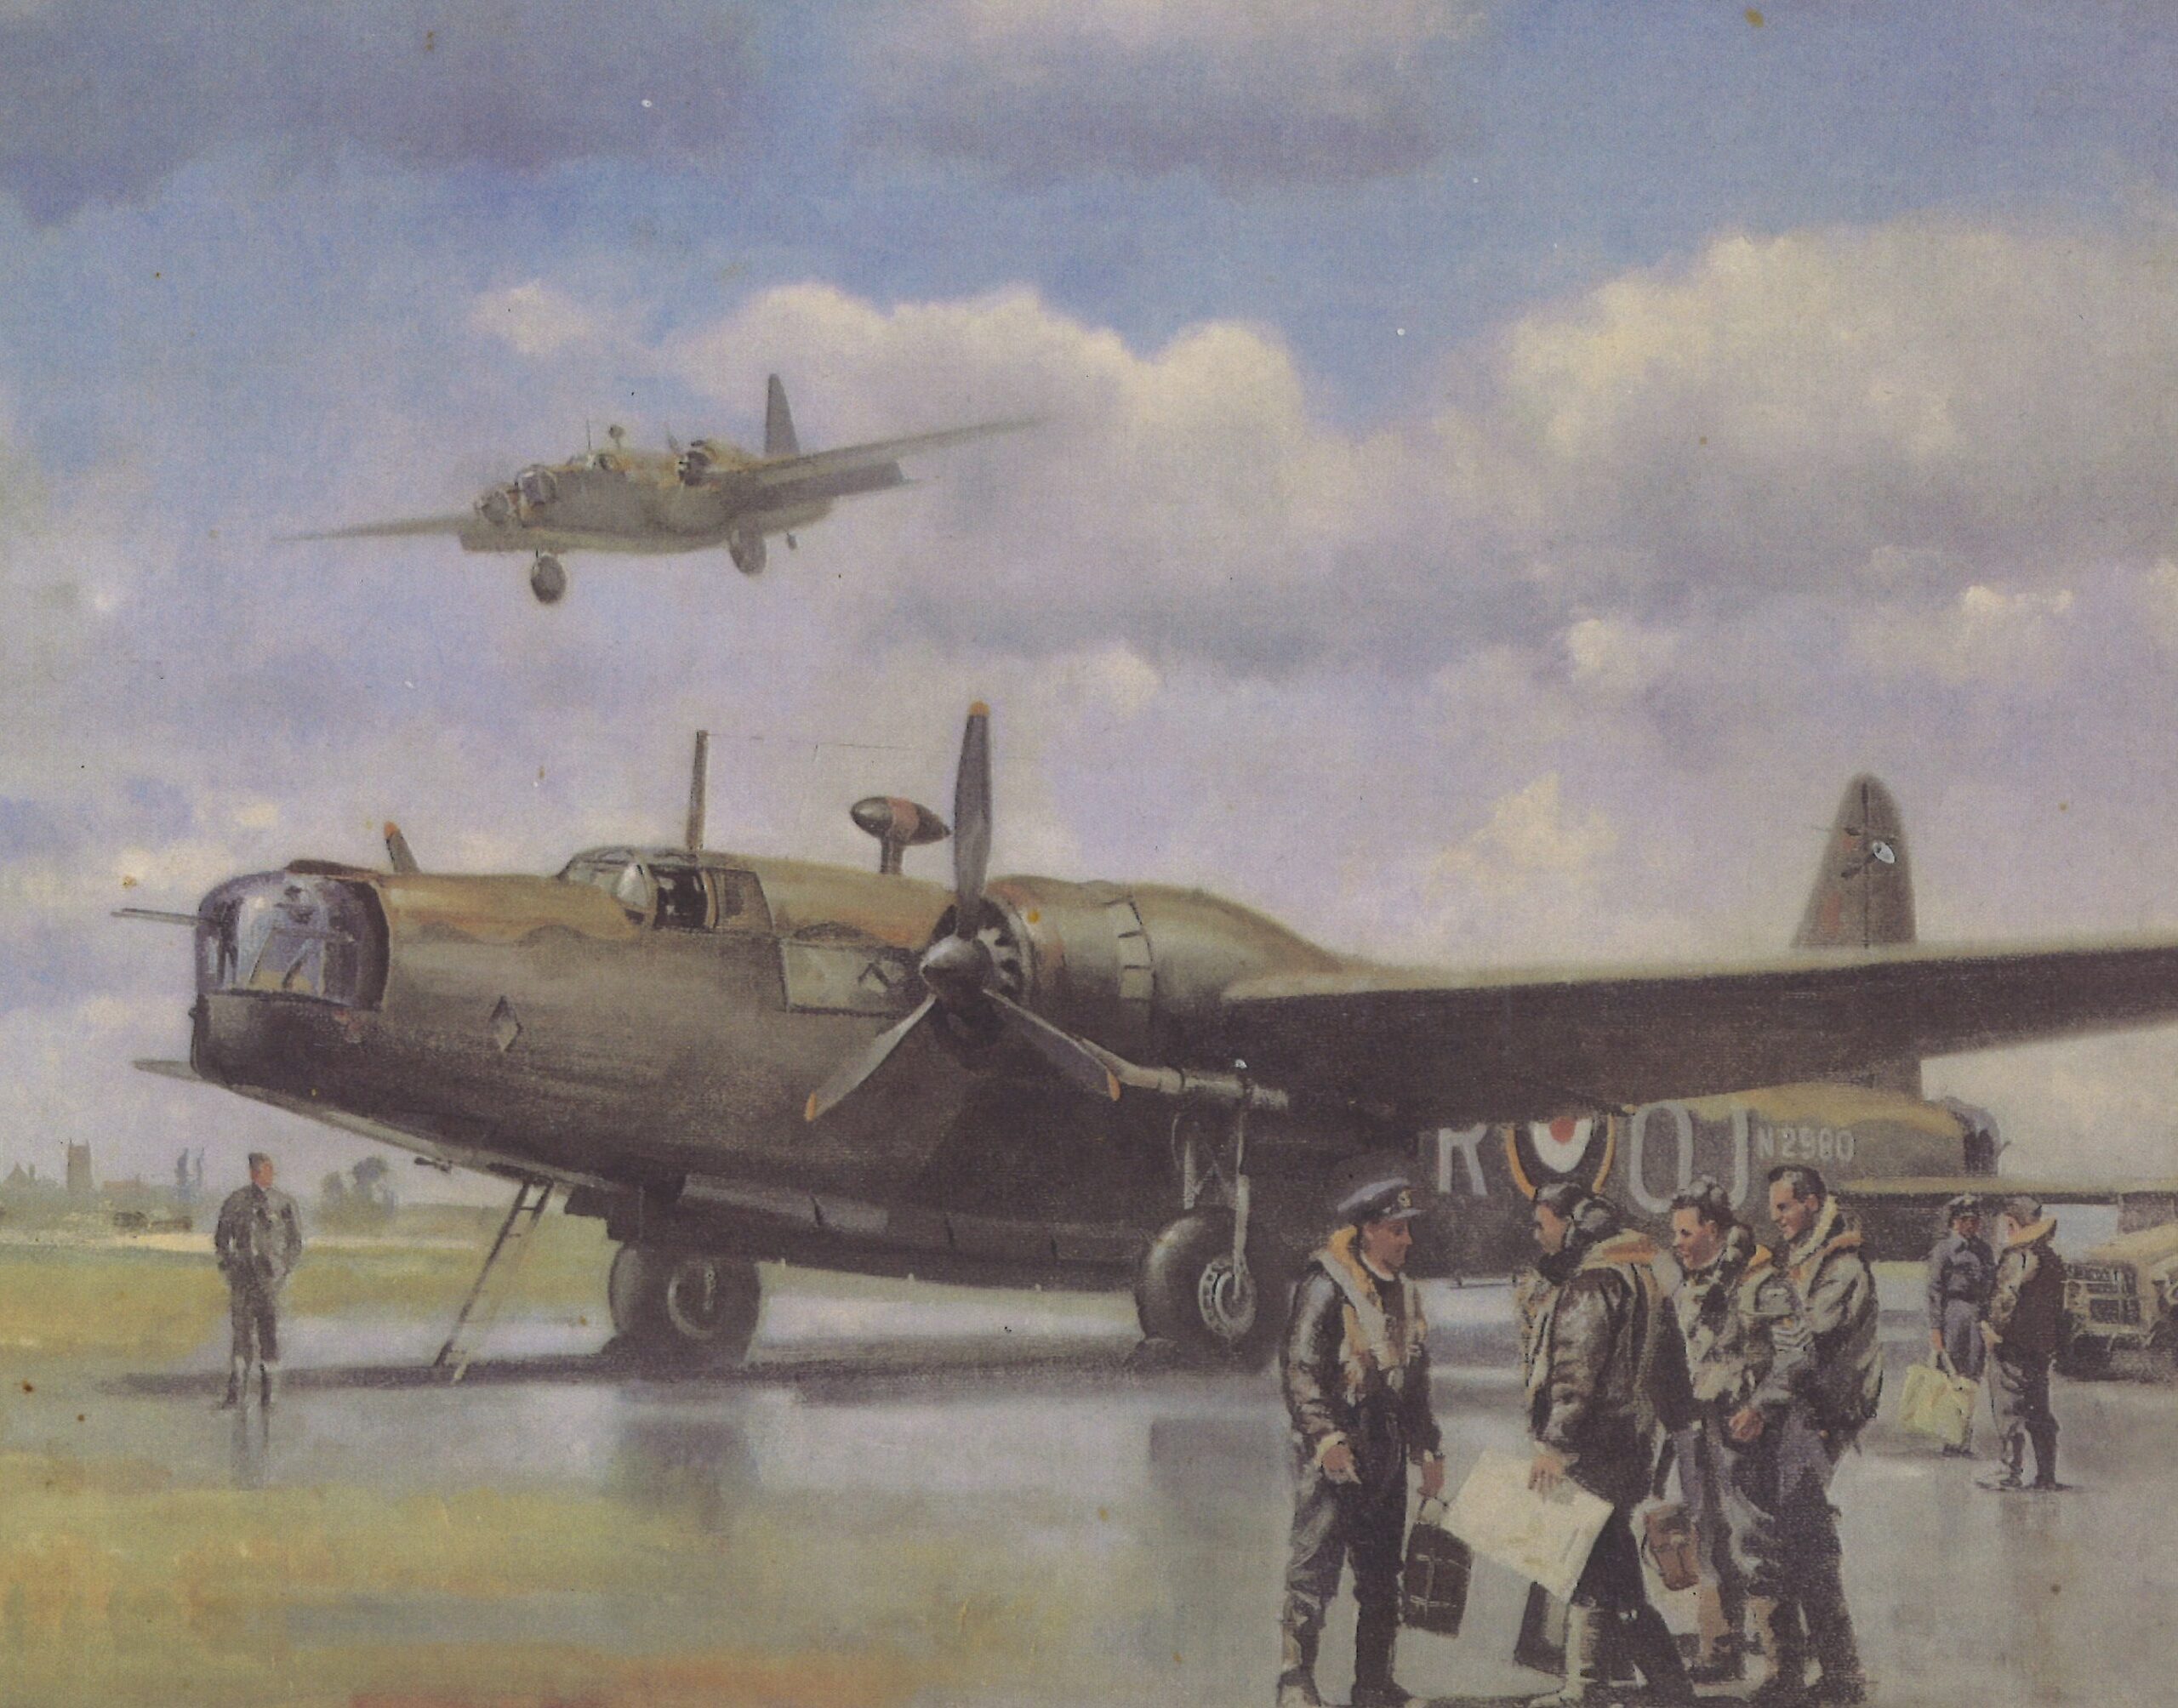 A picture belonging to John, showing the Wellington planes his dad worked on.